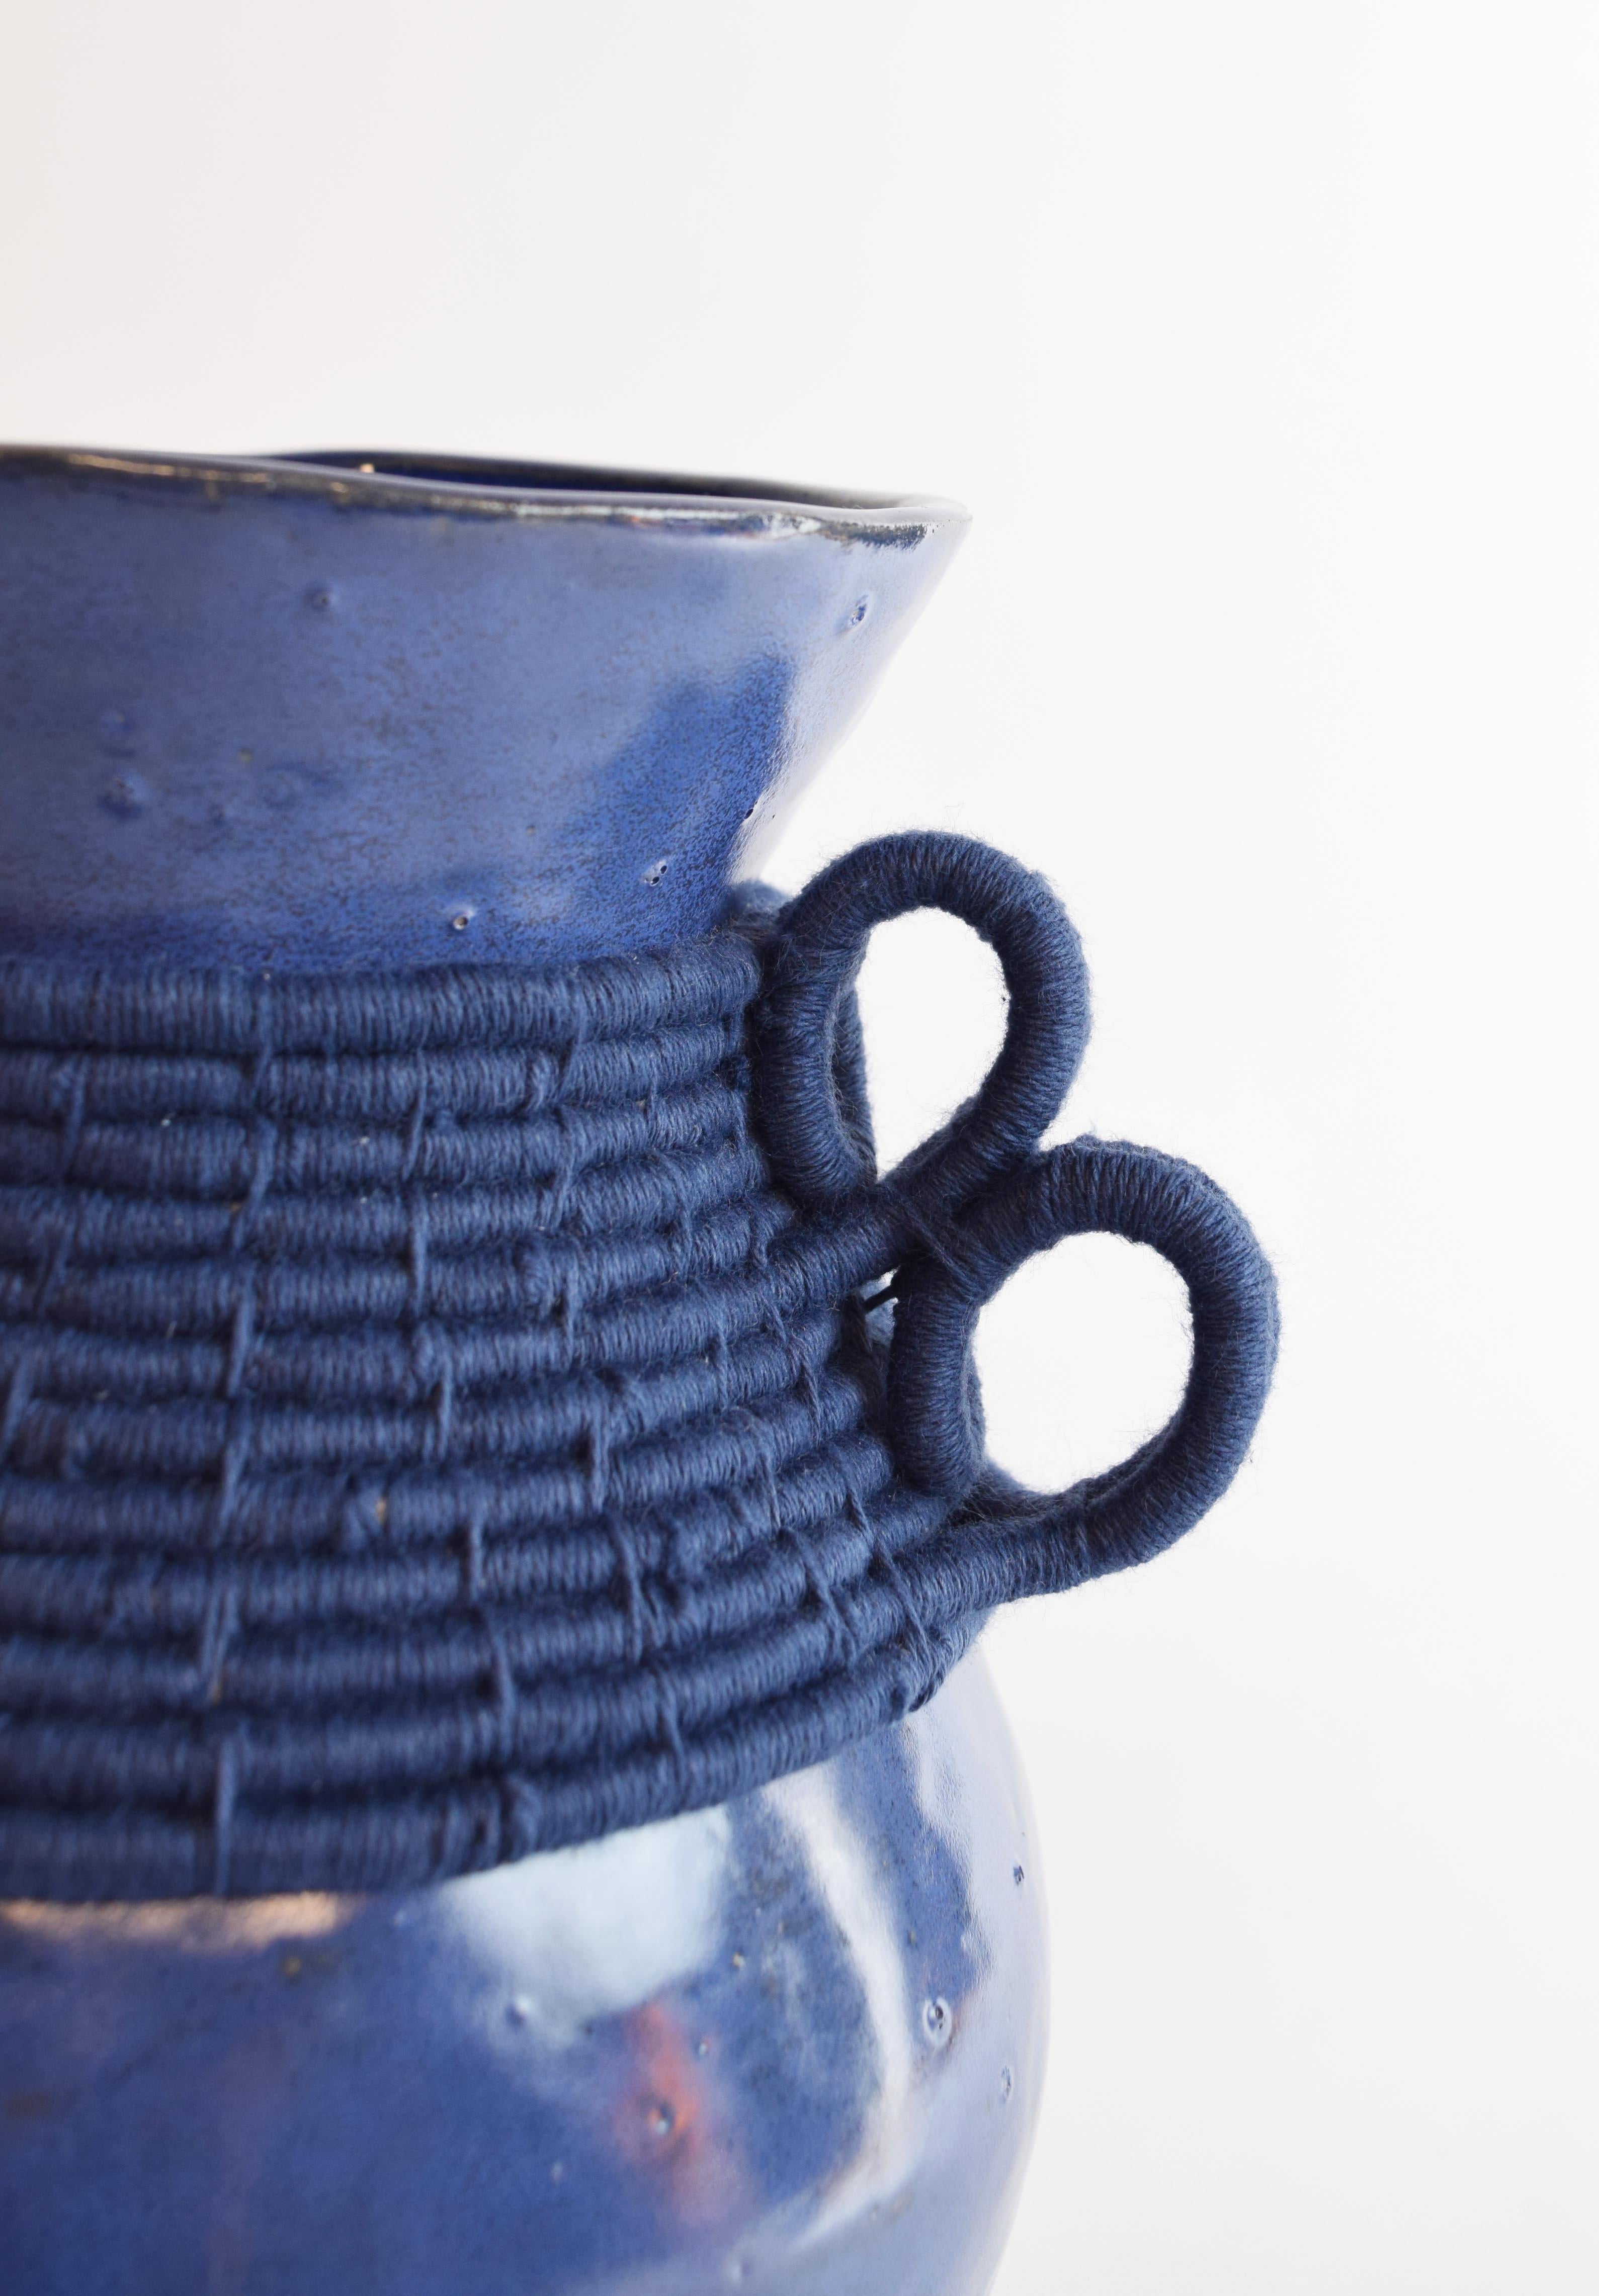 American One of a Kind Handmade Ceramic Vase #780, Blue Glaze, Woven Navy Cotton Detail